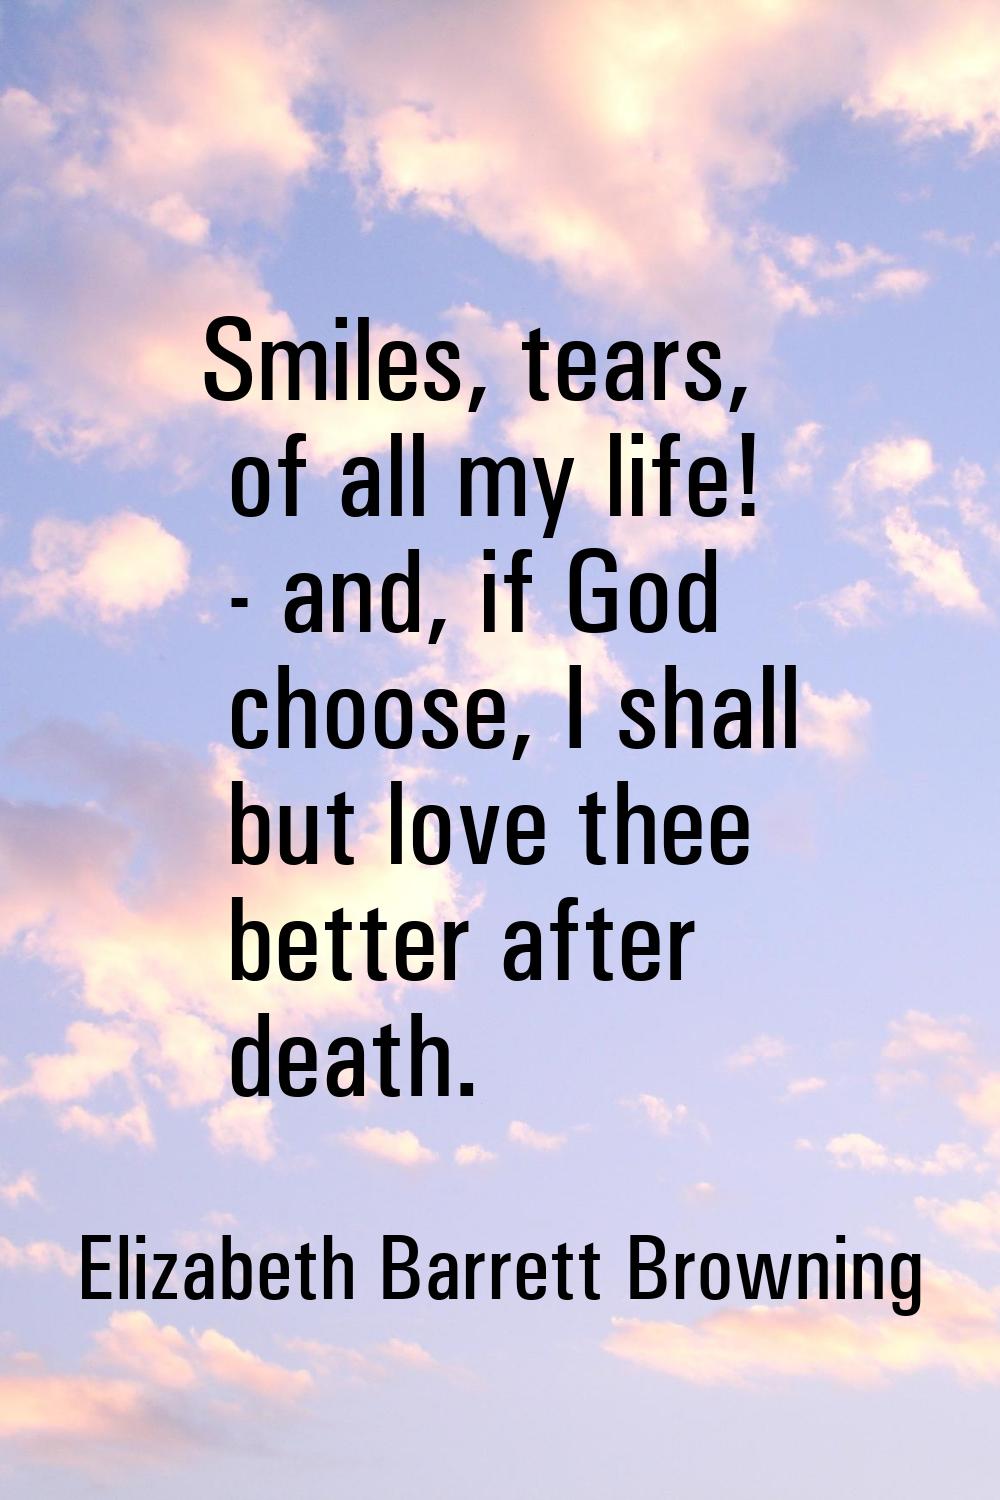 Smiles, tears, of all my life! - and, if God choose, I shall but love thee better after death.